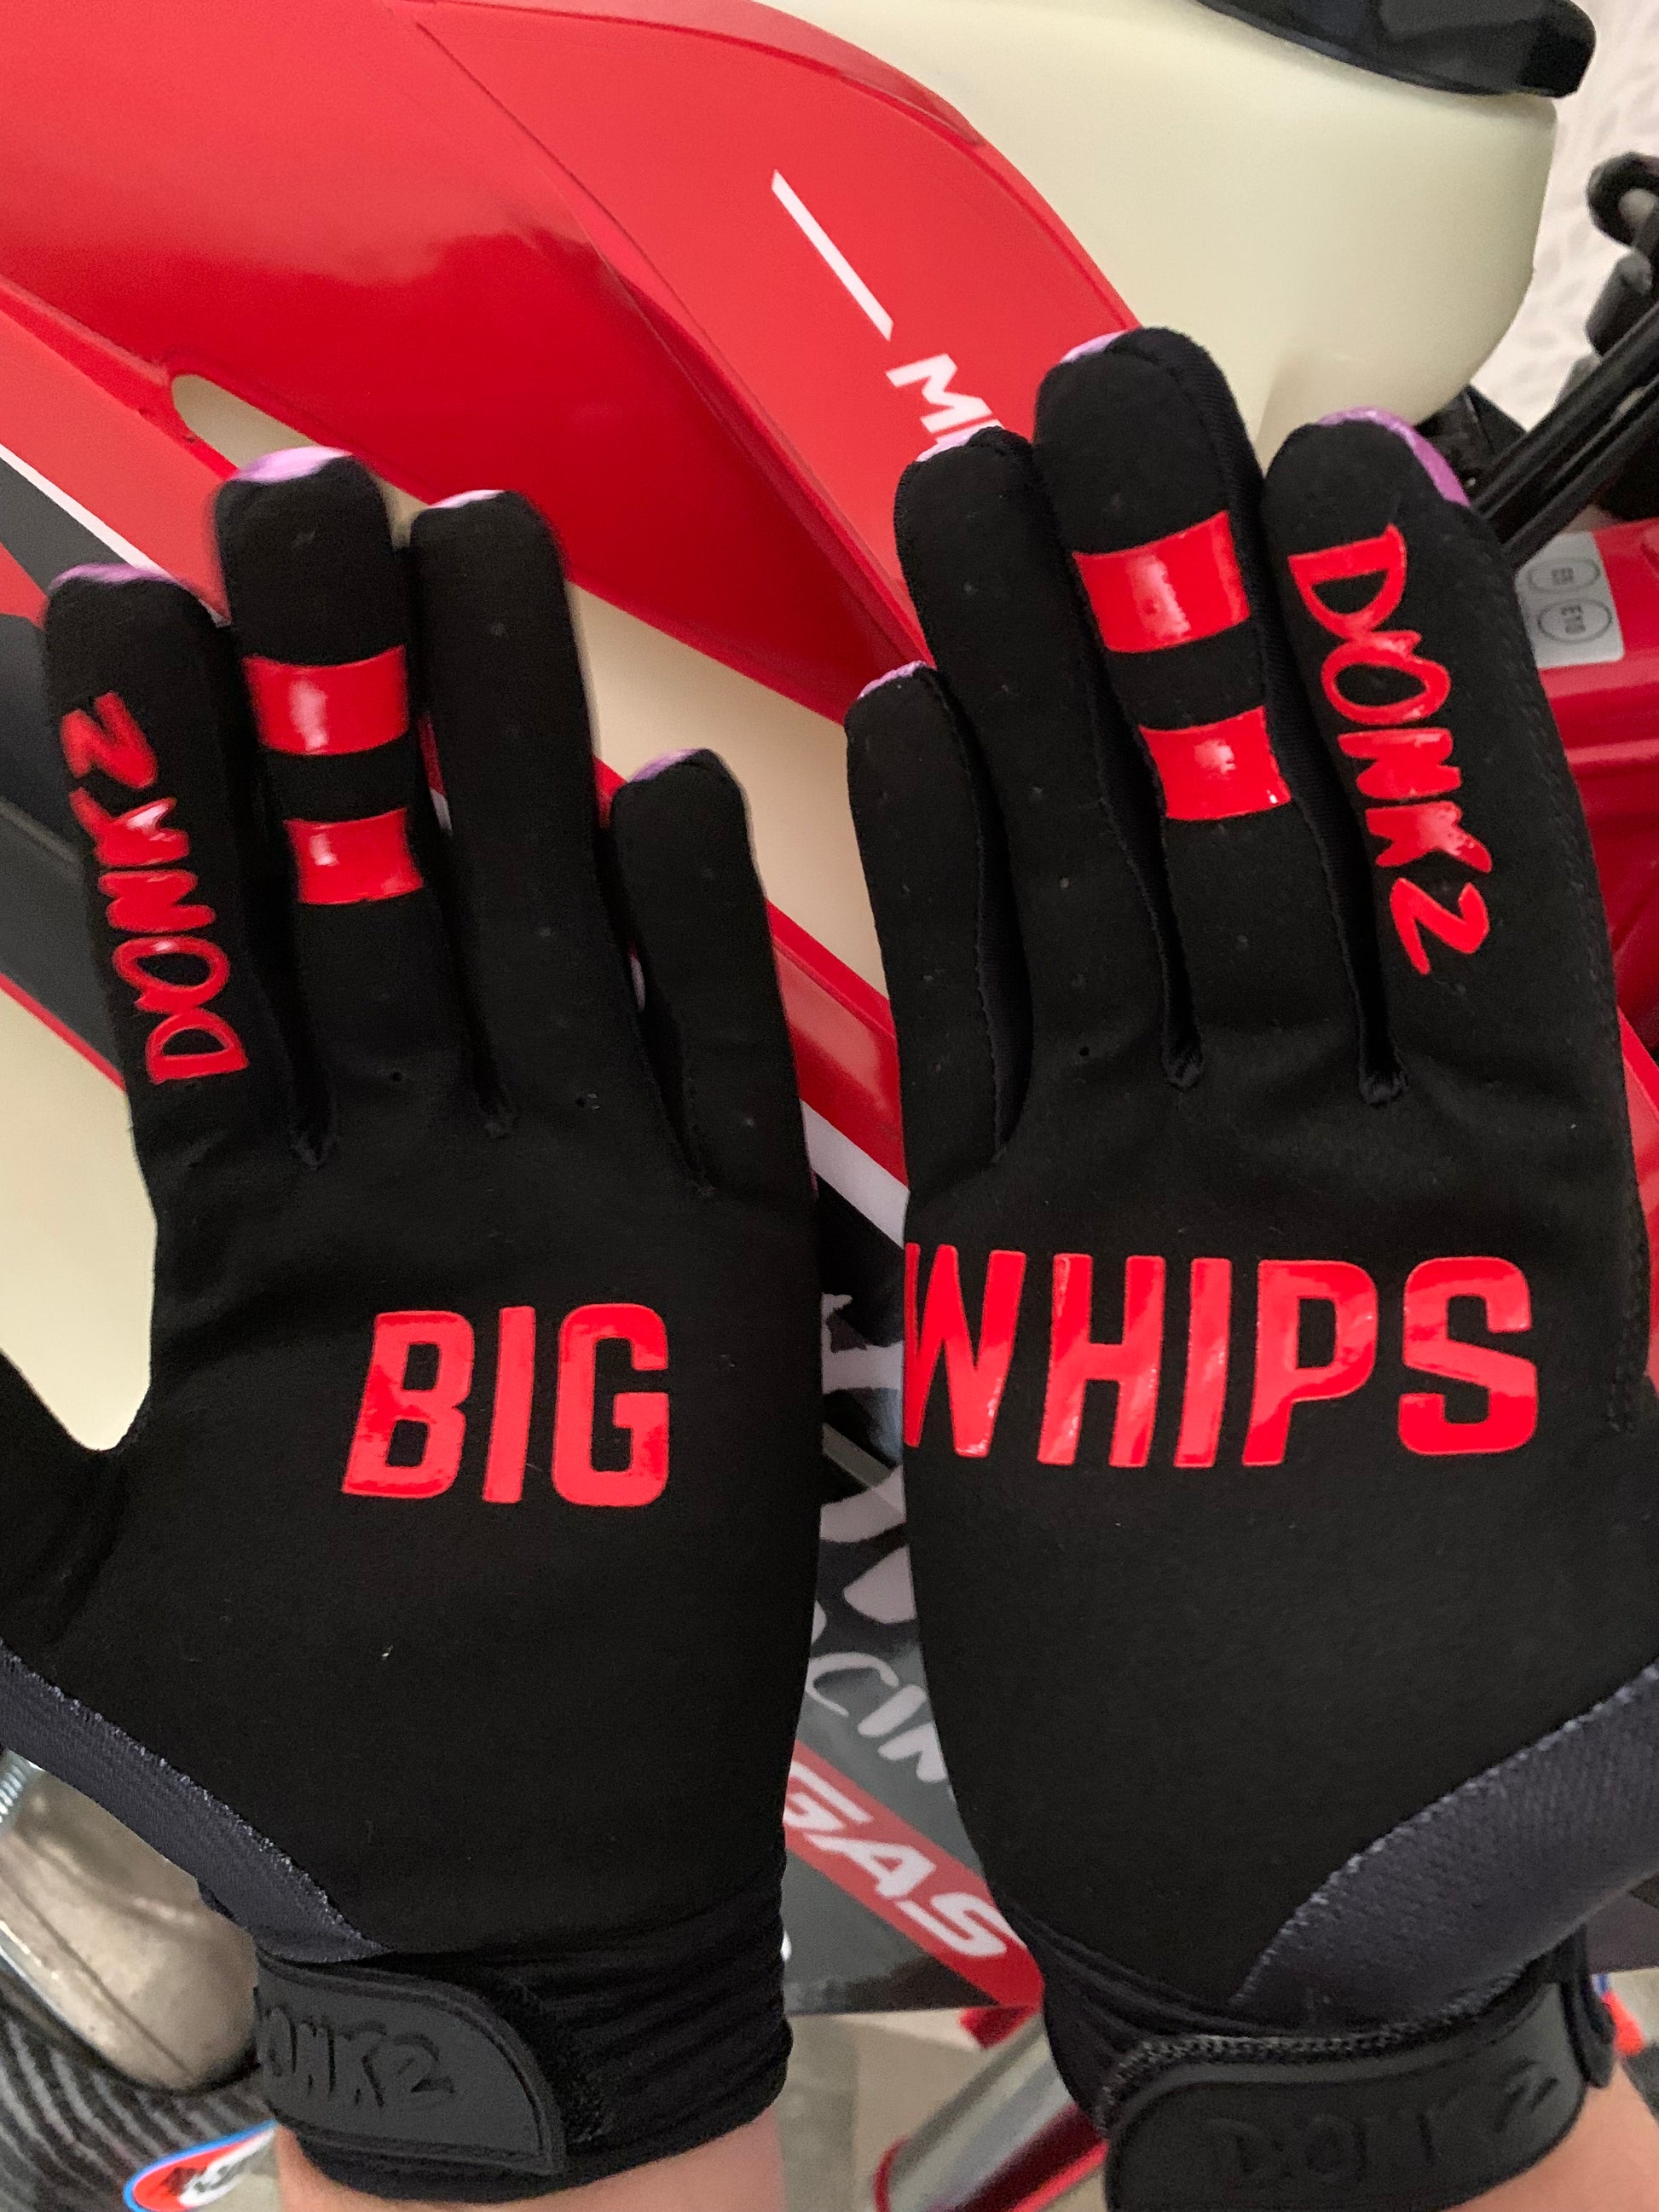 Palm of gloves with Big Whips print in red